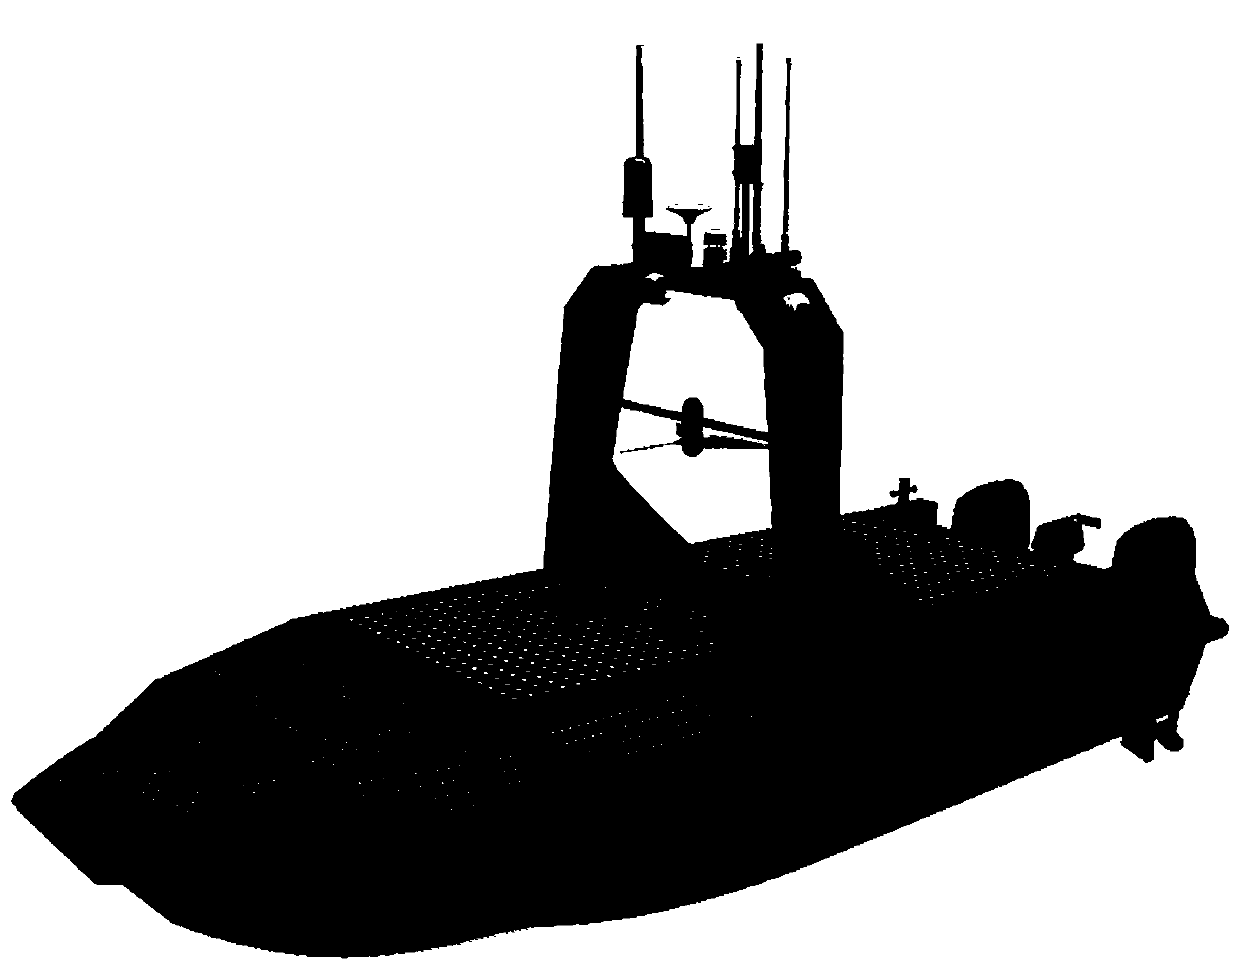 Composite energy source driving system for unmanned surface vehicle